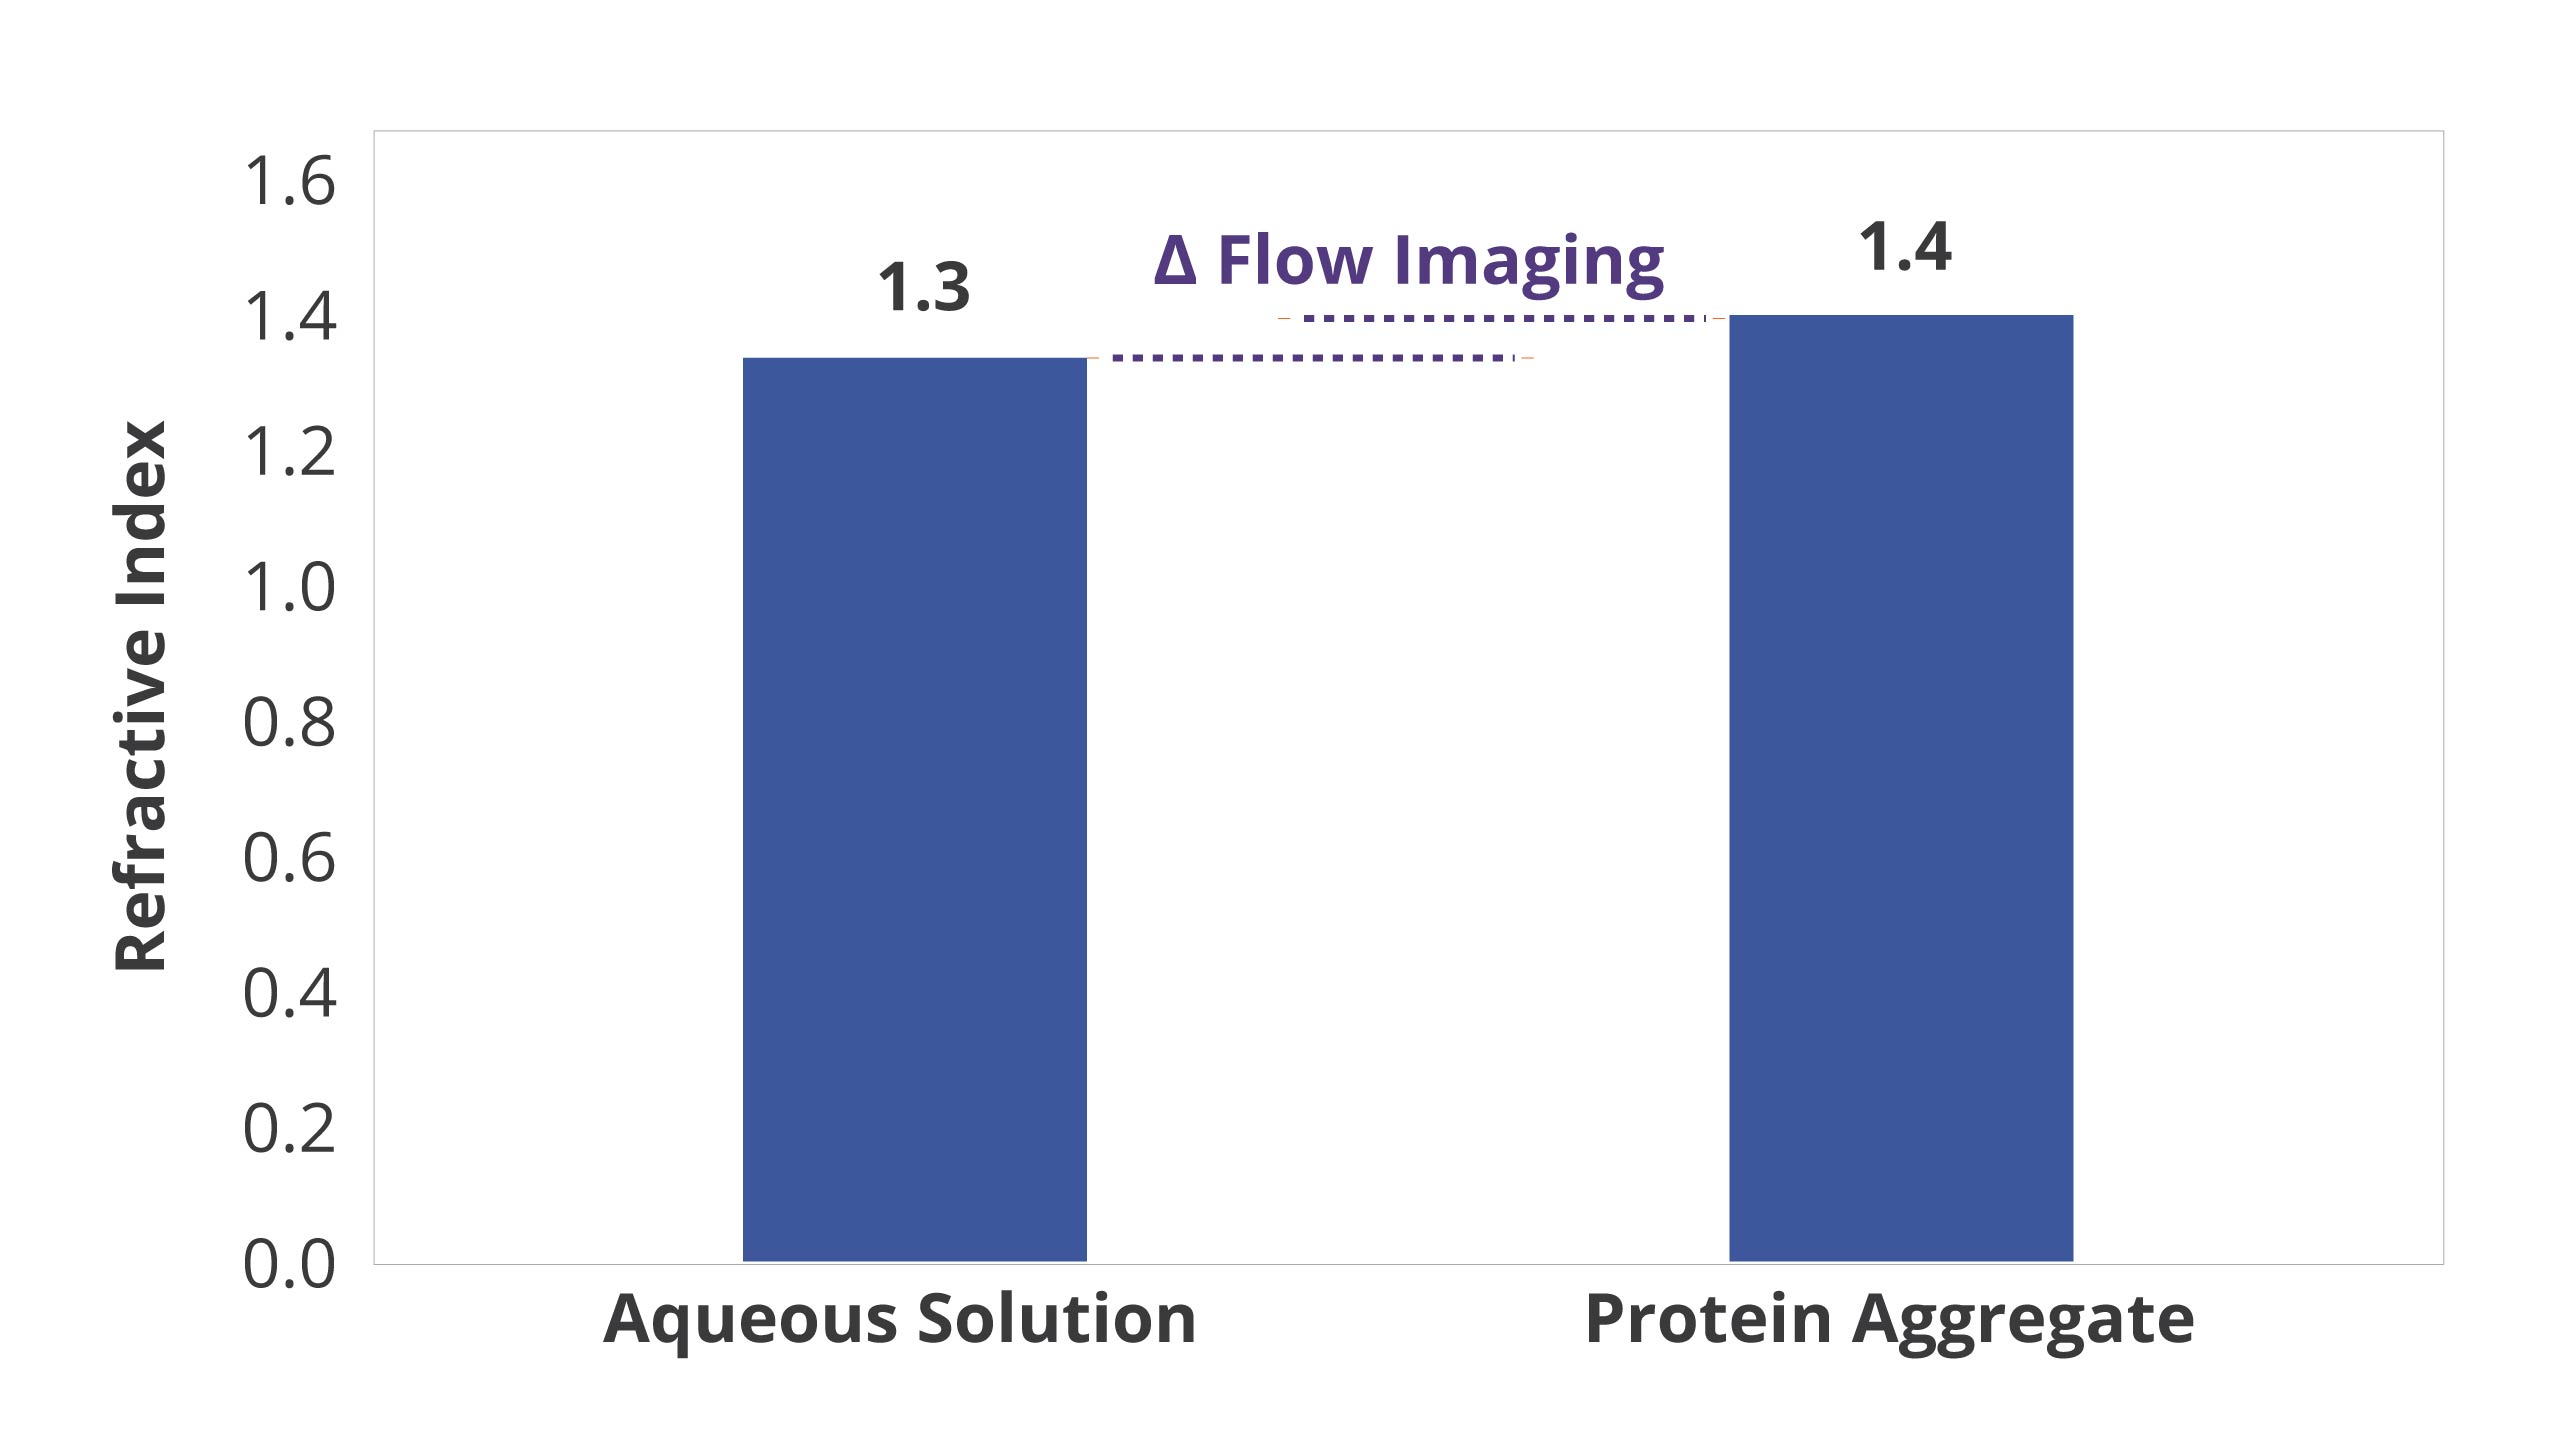 Similar refractive indicies for proteins and surrounding solution reduce reliability of measurements with flow imaging.